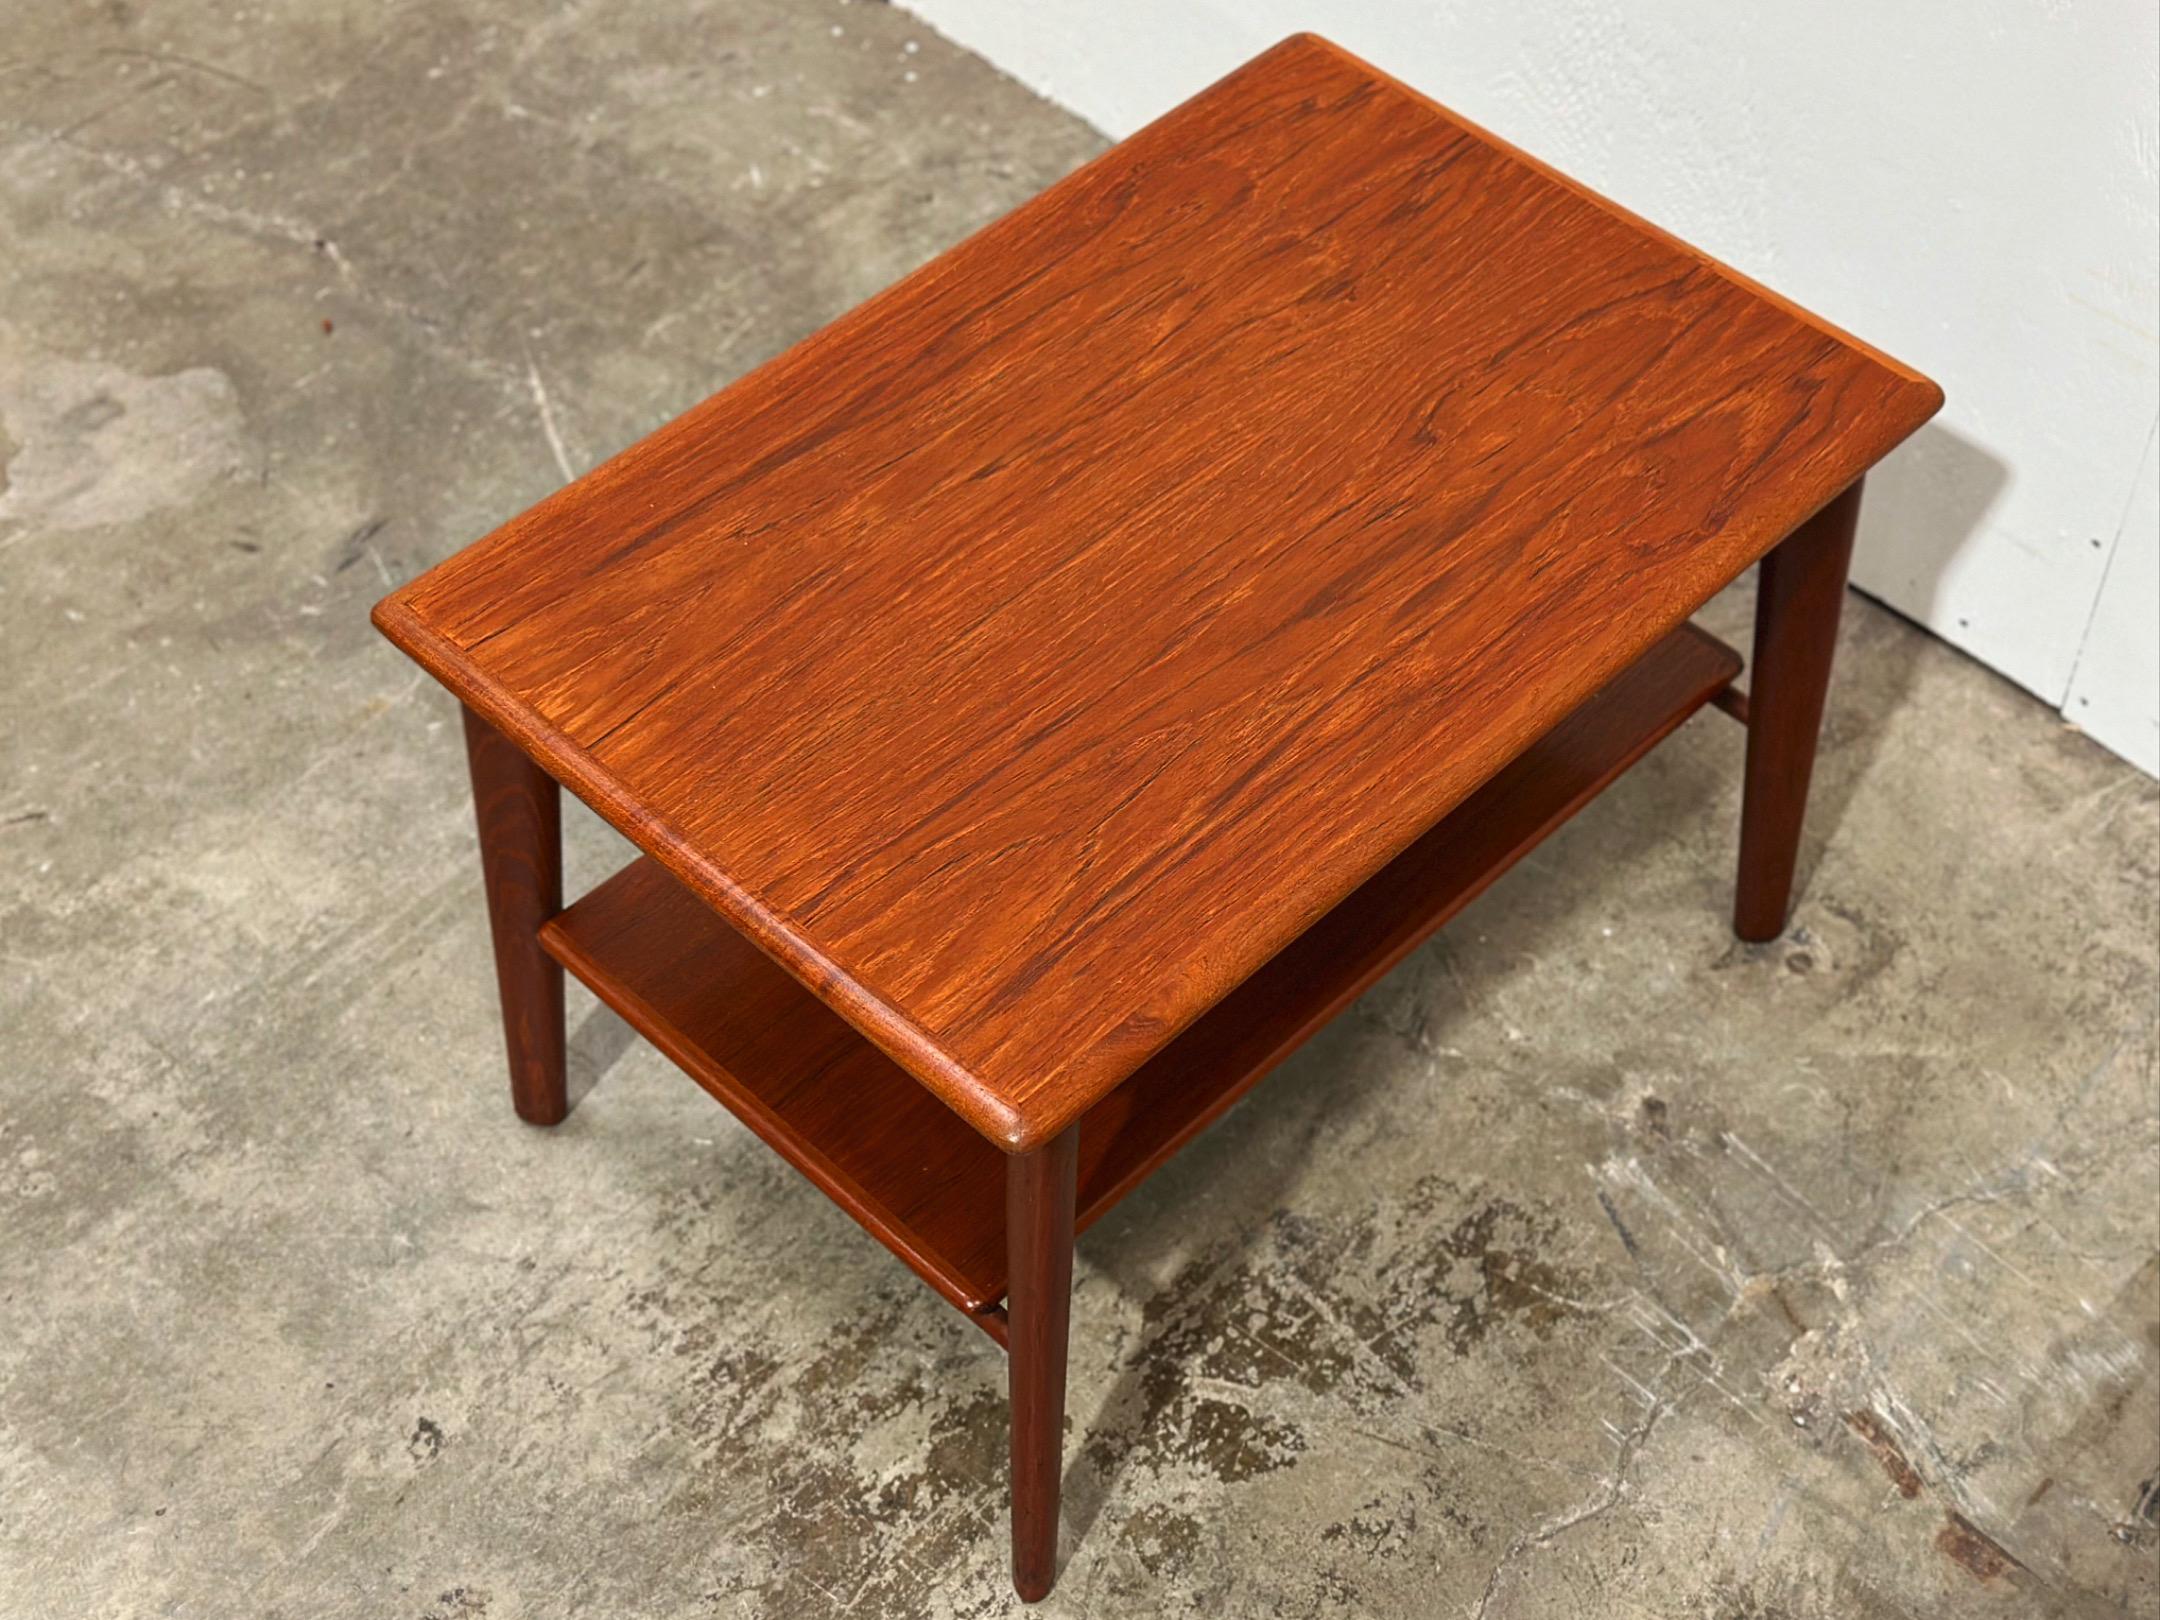 Mid century Danish modern teak side or end table designed by Svend Age Madsen for Karl Lindegaard. Rectangular top with rounded edges with one drawer and a convenient lower shelf. Solid sculpted old growth teak legs.
Fully restored by our team -